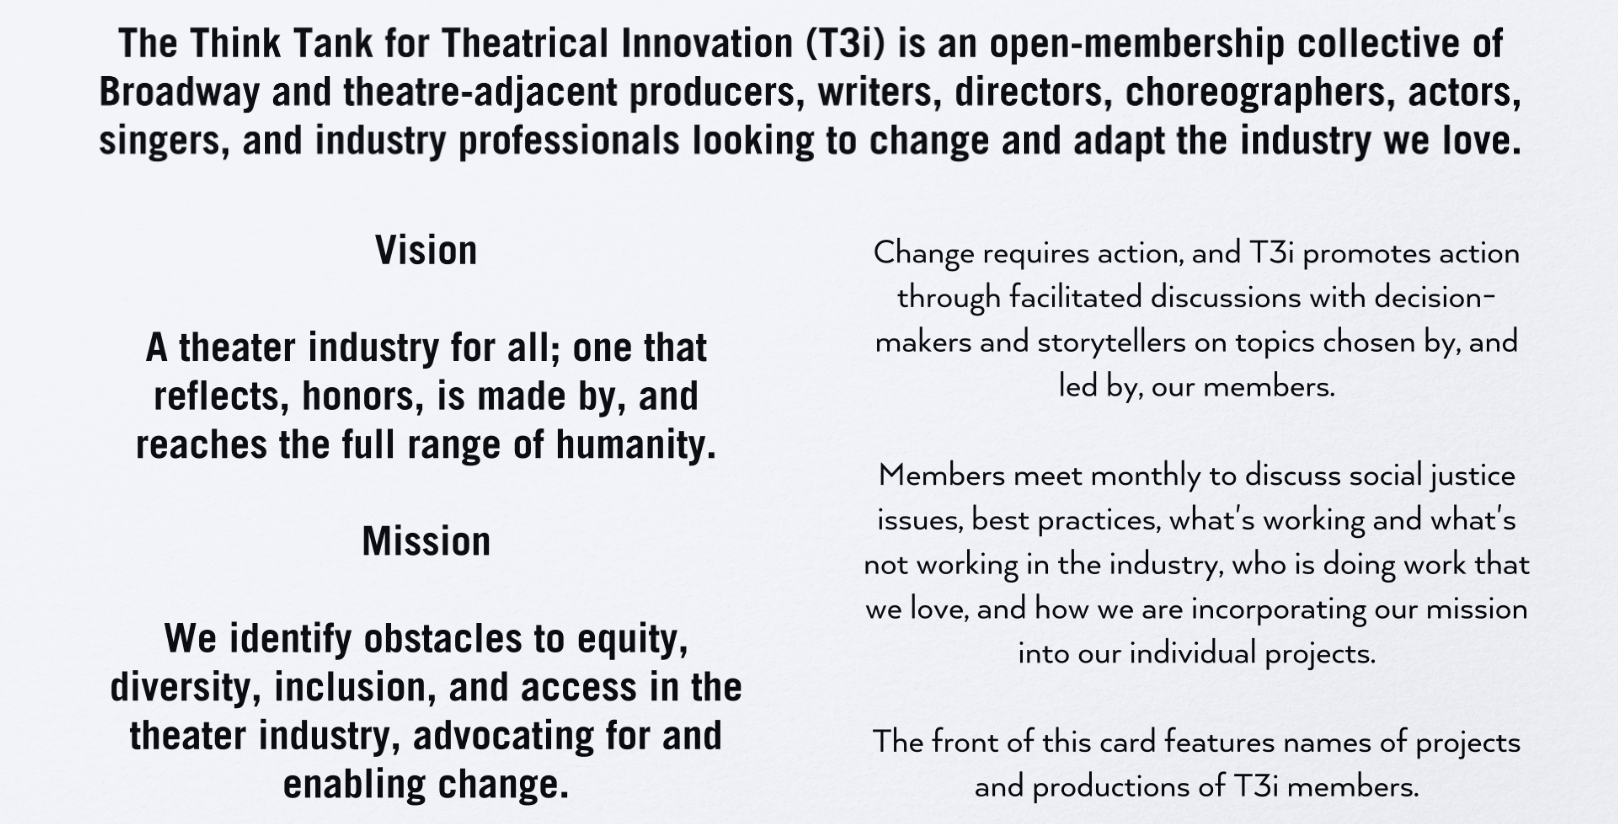 Text image describing the mission, vision, and reason for T3i.